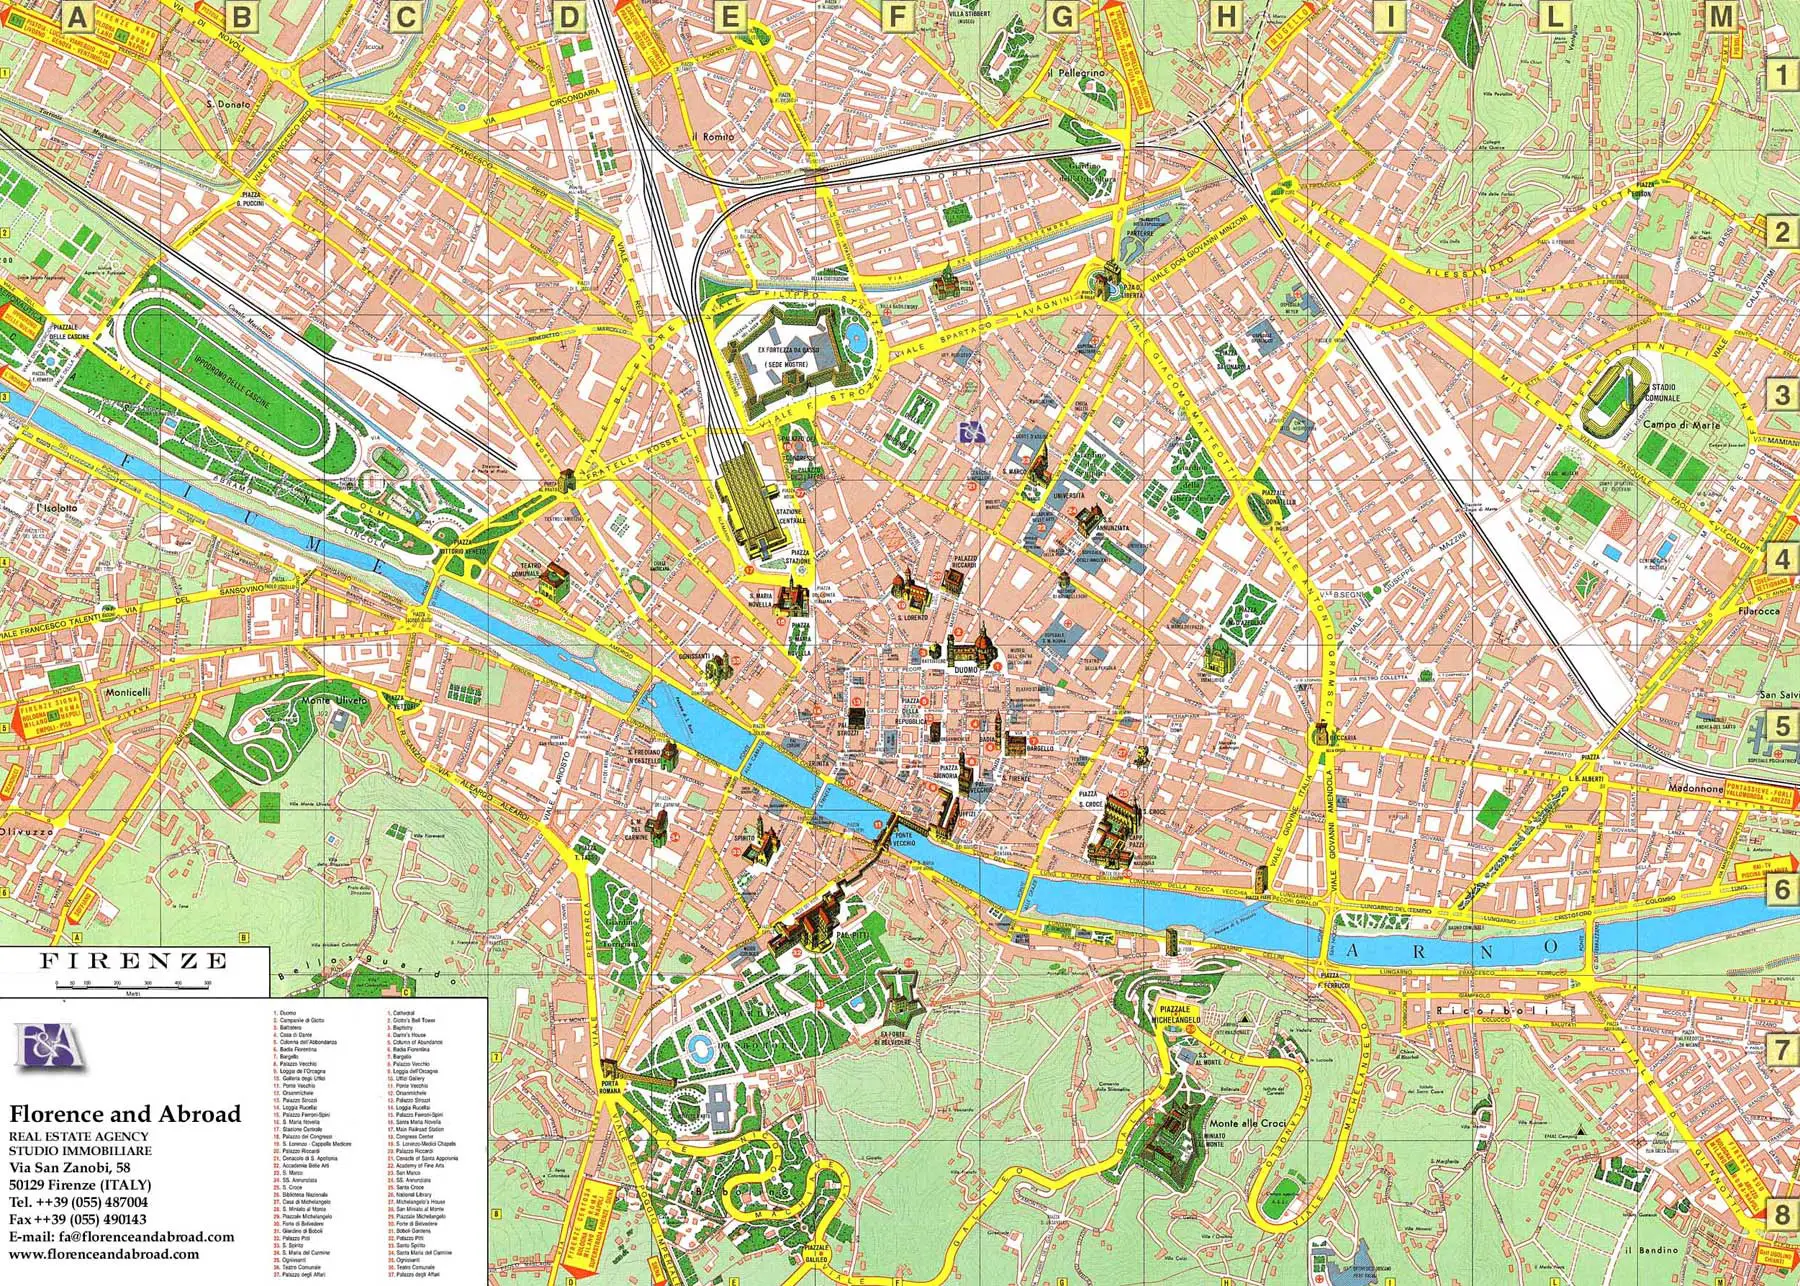 Detailed City Map of Florence (firenze)